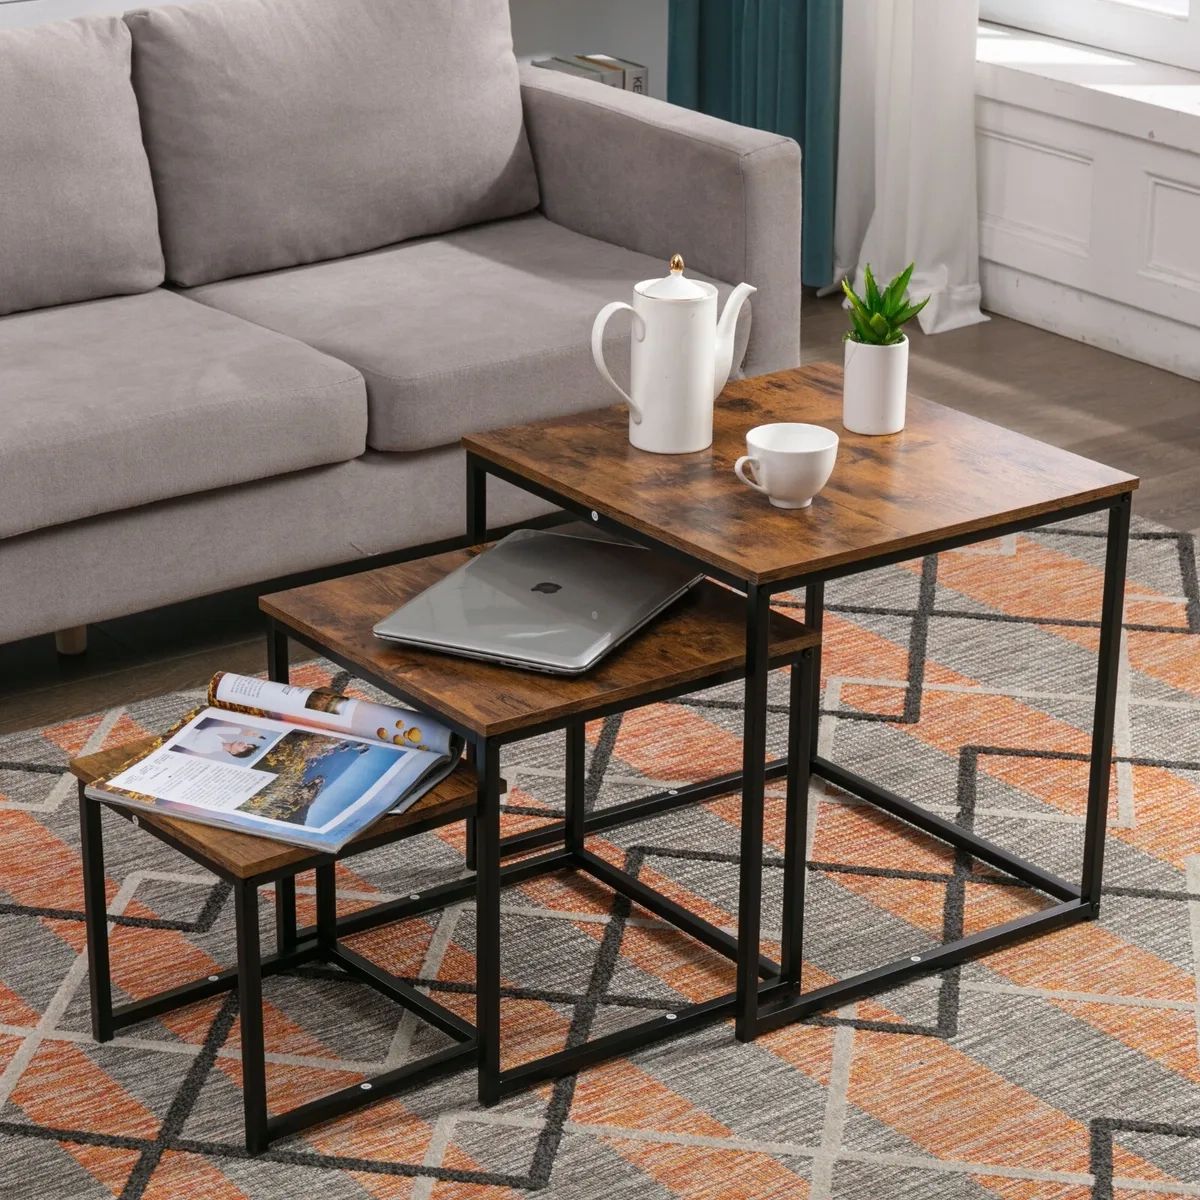 Nest Coffee Table 3 In 1 Set Compact Modern Design For Space Saving For Any  Room | Ebay Regarding Coffee Tables Of 3 Nesting Tables (View 3 of 15)